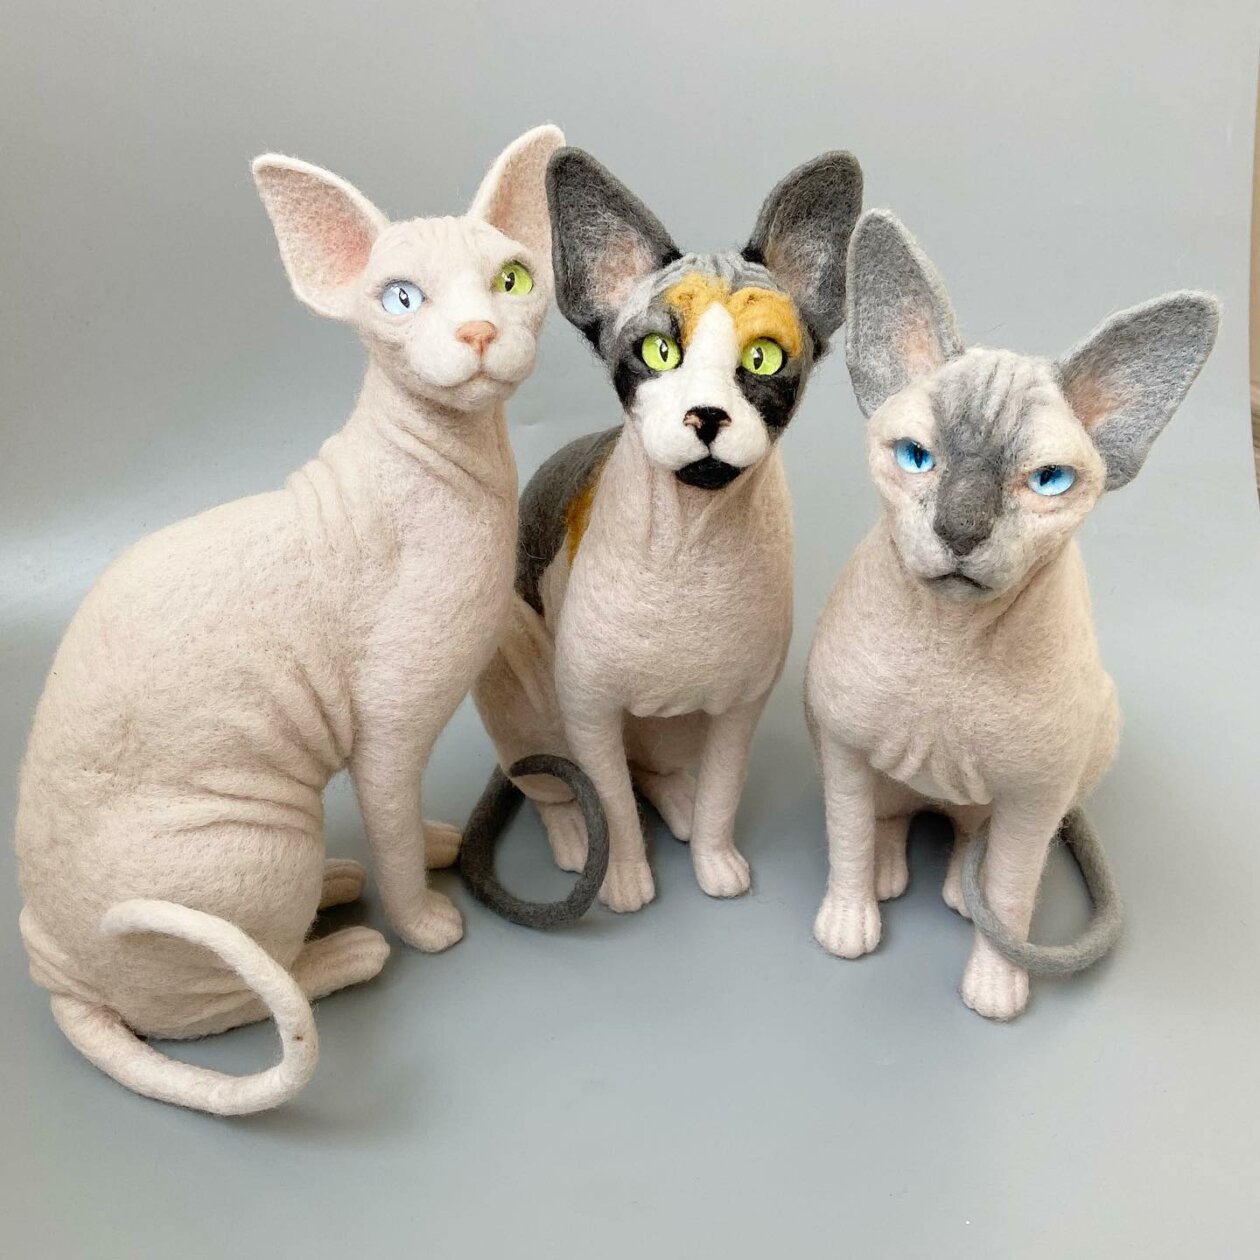 Hyper Realistic Animal Felted Wool Sculptures By Alla Rebrova (9)